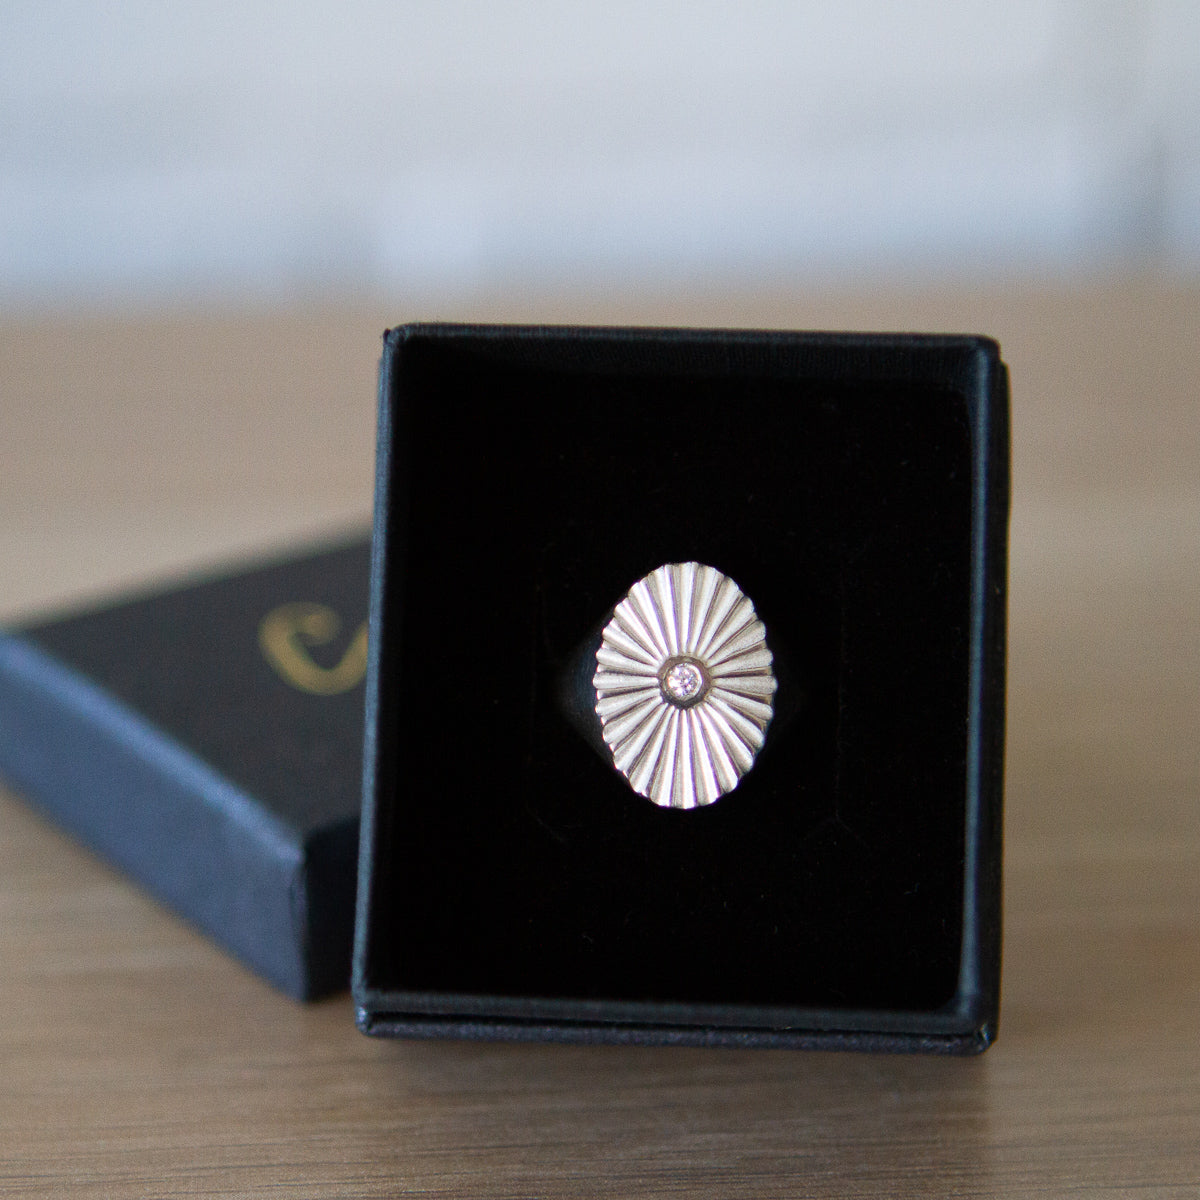 Large silver oval signet ring with a carved sunburst pattern and diamond center in a gift box